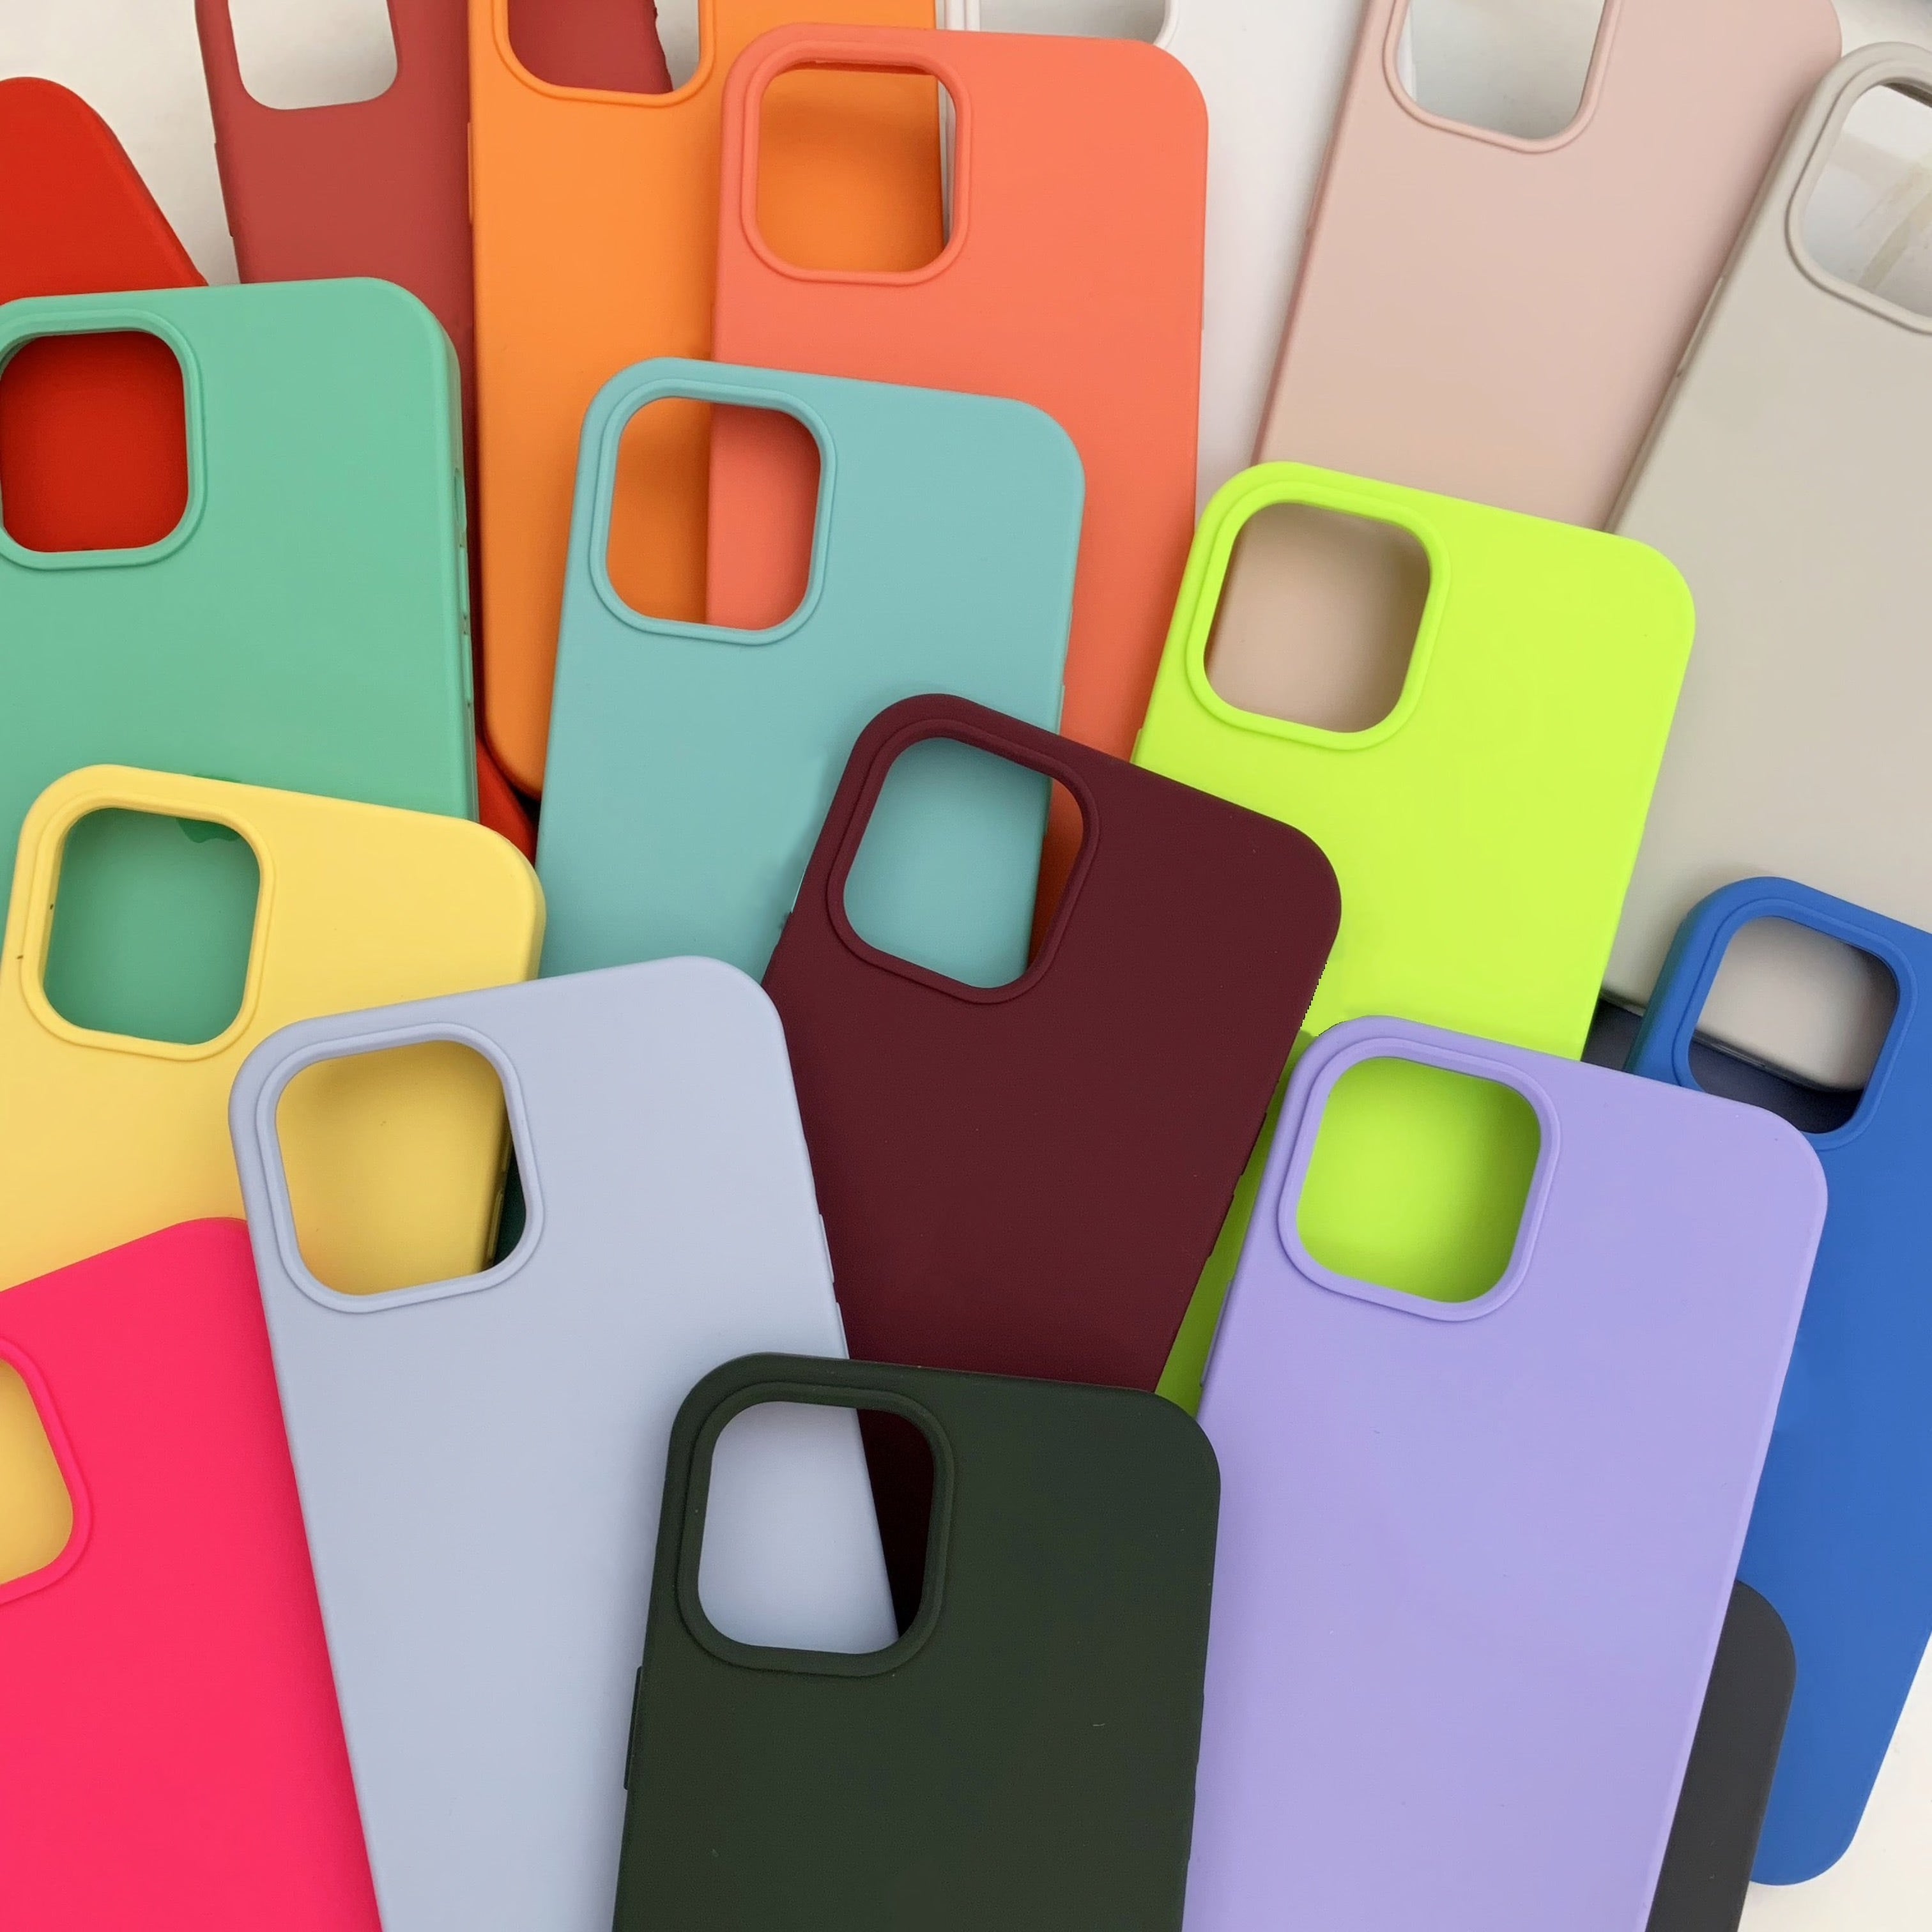 Silicone Case for iPhone - OEM Soft Silicone Rubber - 7 Colors